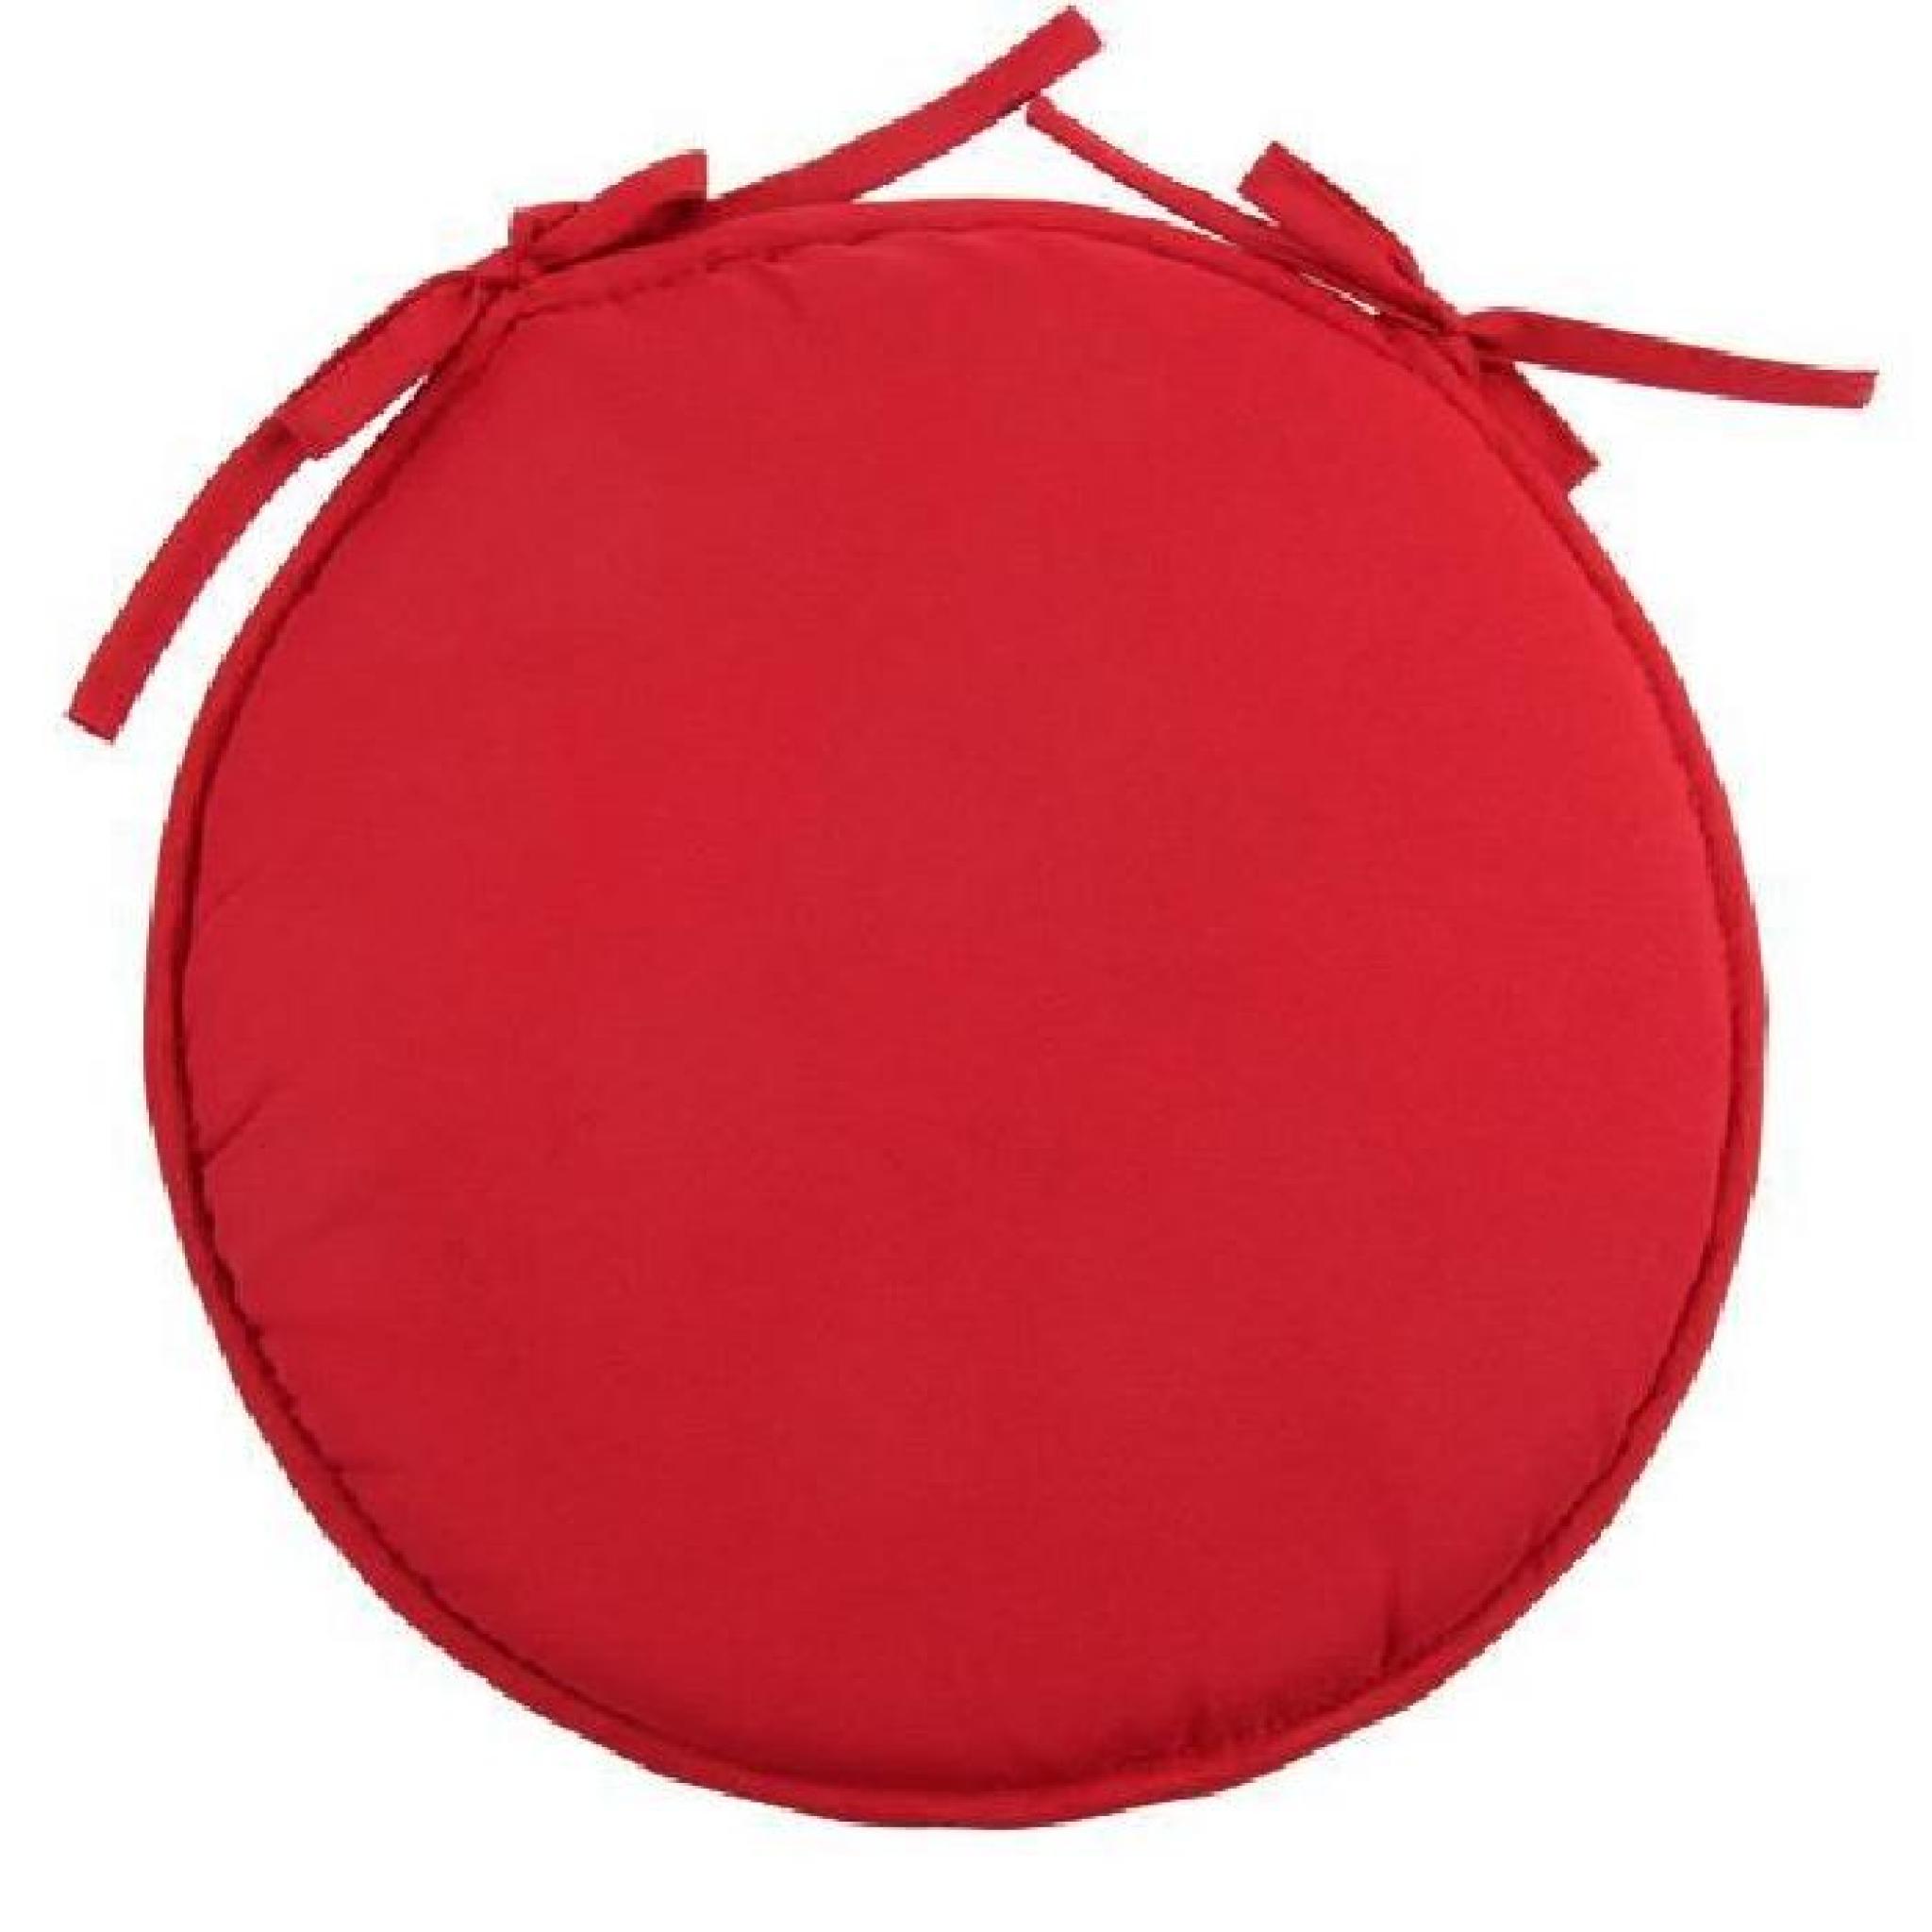 Galette de chaise ronde Gamme Nelson Rouge griotte